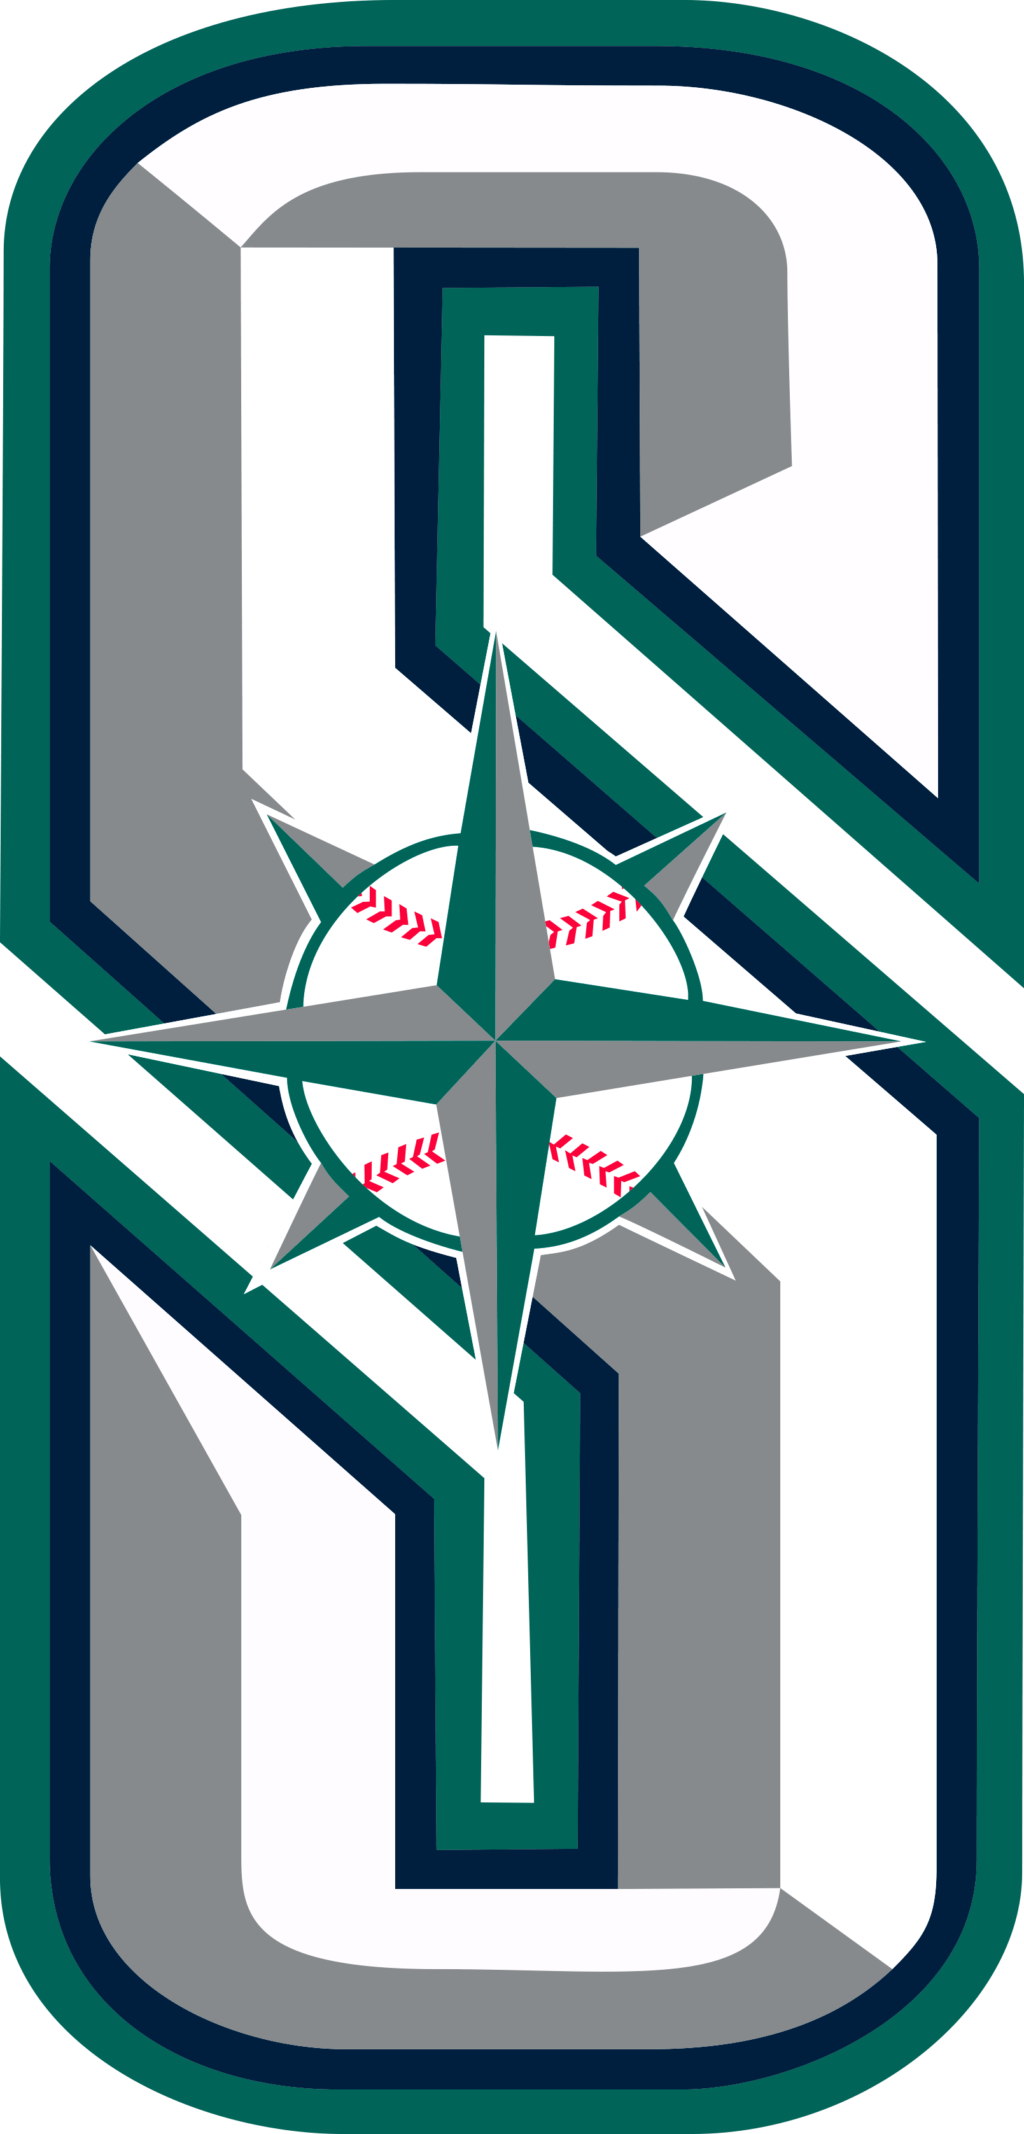 seattle mariners 13 MLB Seattle Mariners SVG, SVG Files For Silhouette, Seattle Mariners Files For Cricut, Seattle Mariners SVG, DXF, EPS, PNG Instant Download. Seattle Mariners SVG, SVG Files For Silhouette, Seattle Mariners Files For Cricut, Seattle Mariners SVG, DXF, EPS, PNG Instant Download.